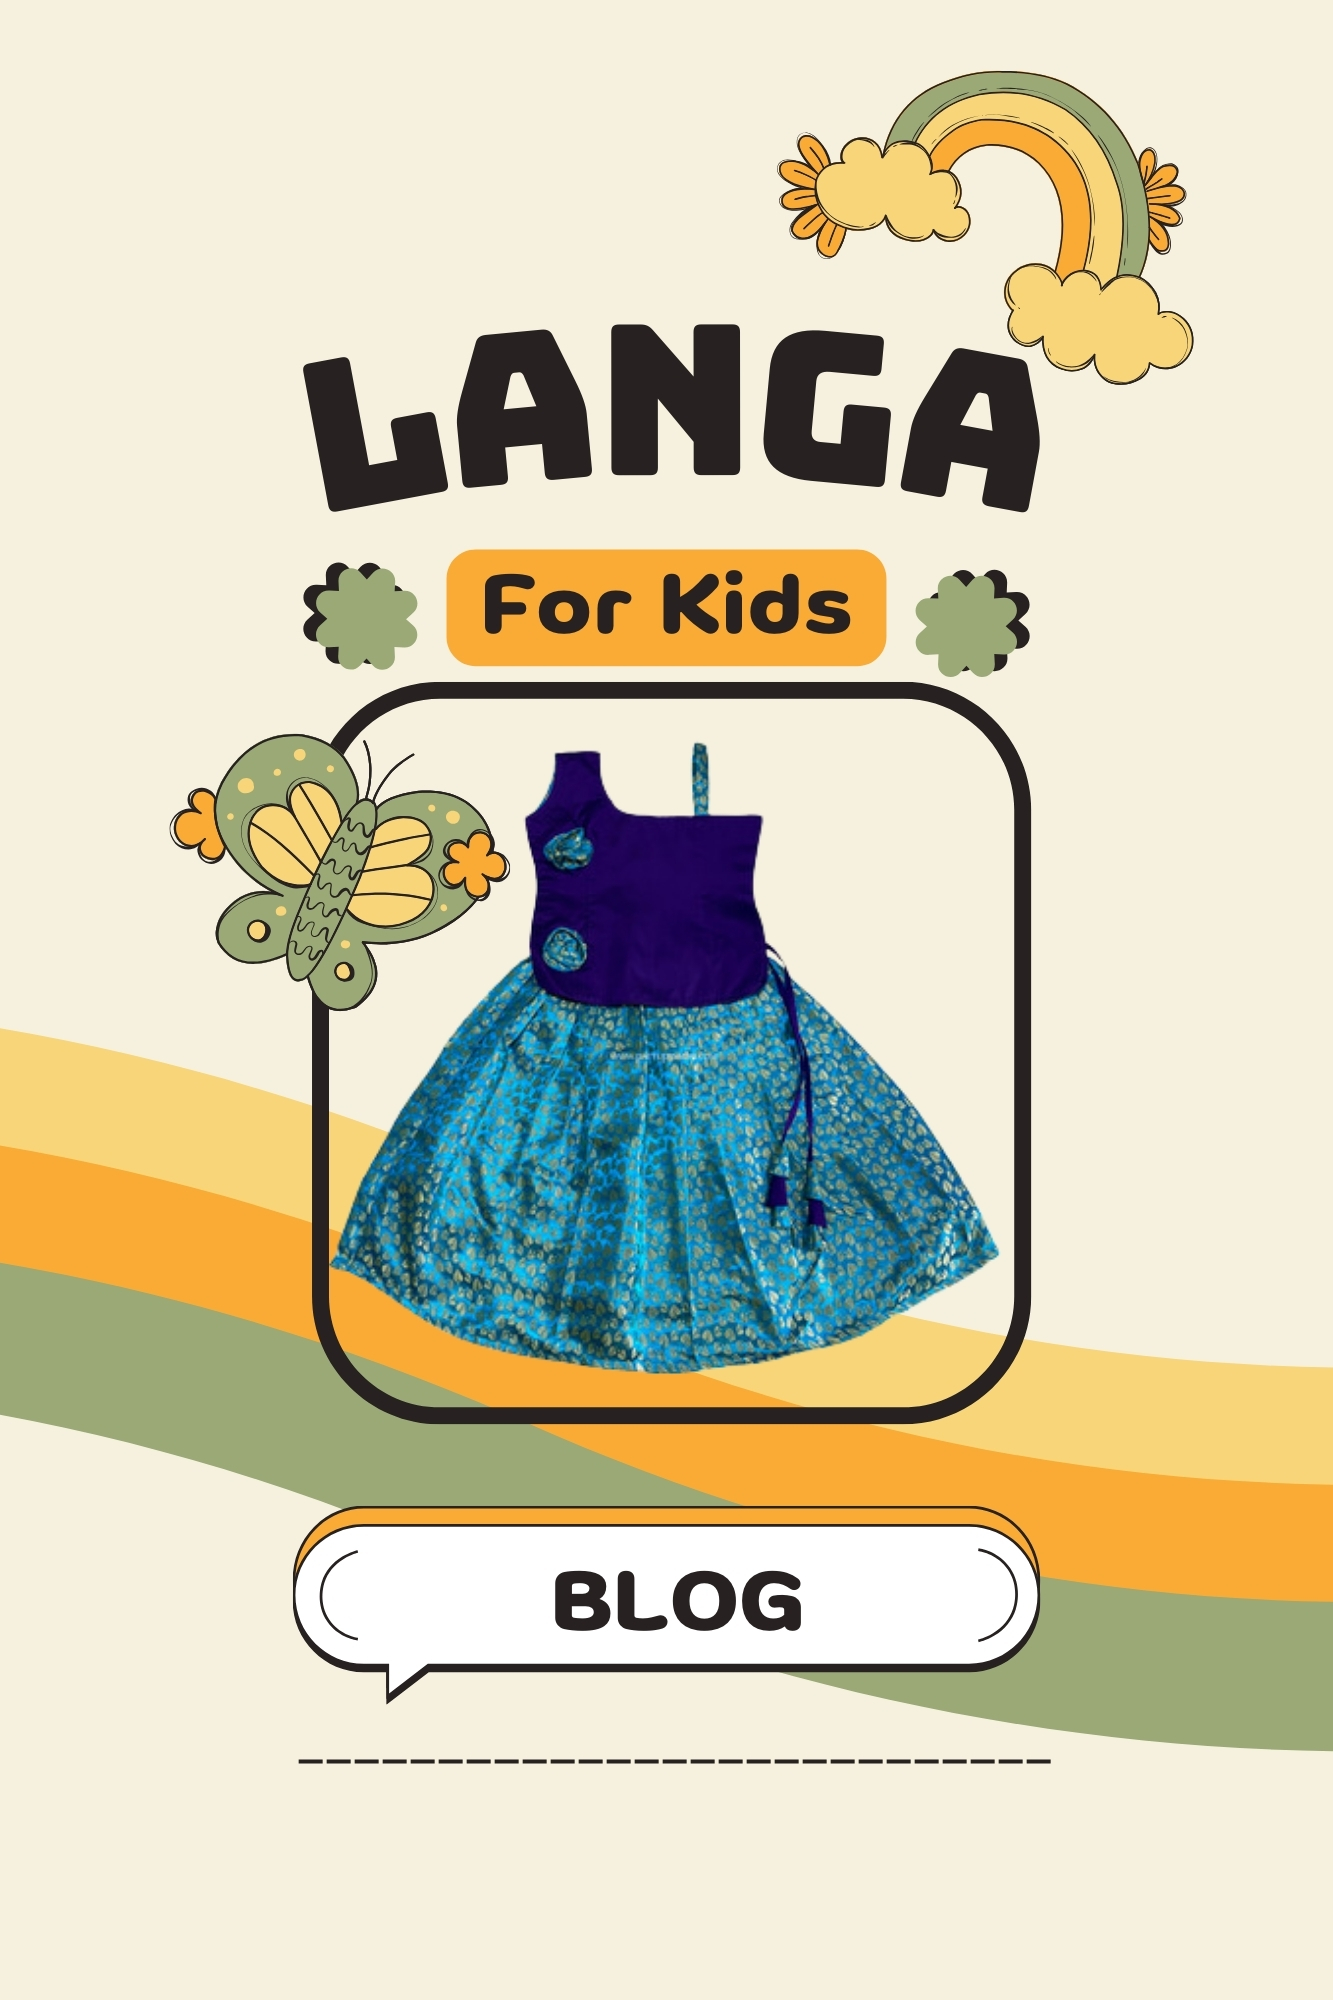 Exploring the Heritage: Different Types of Silk Langa for Kids